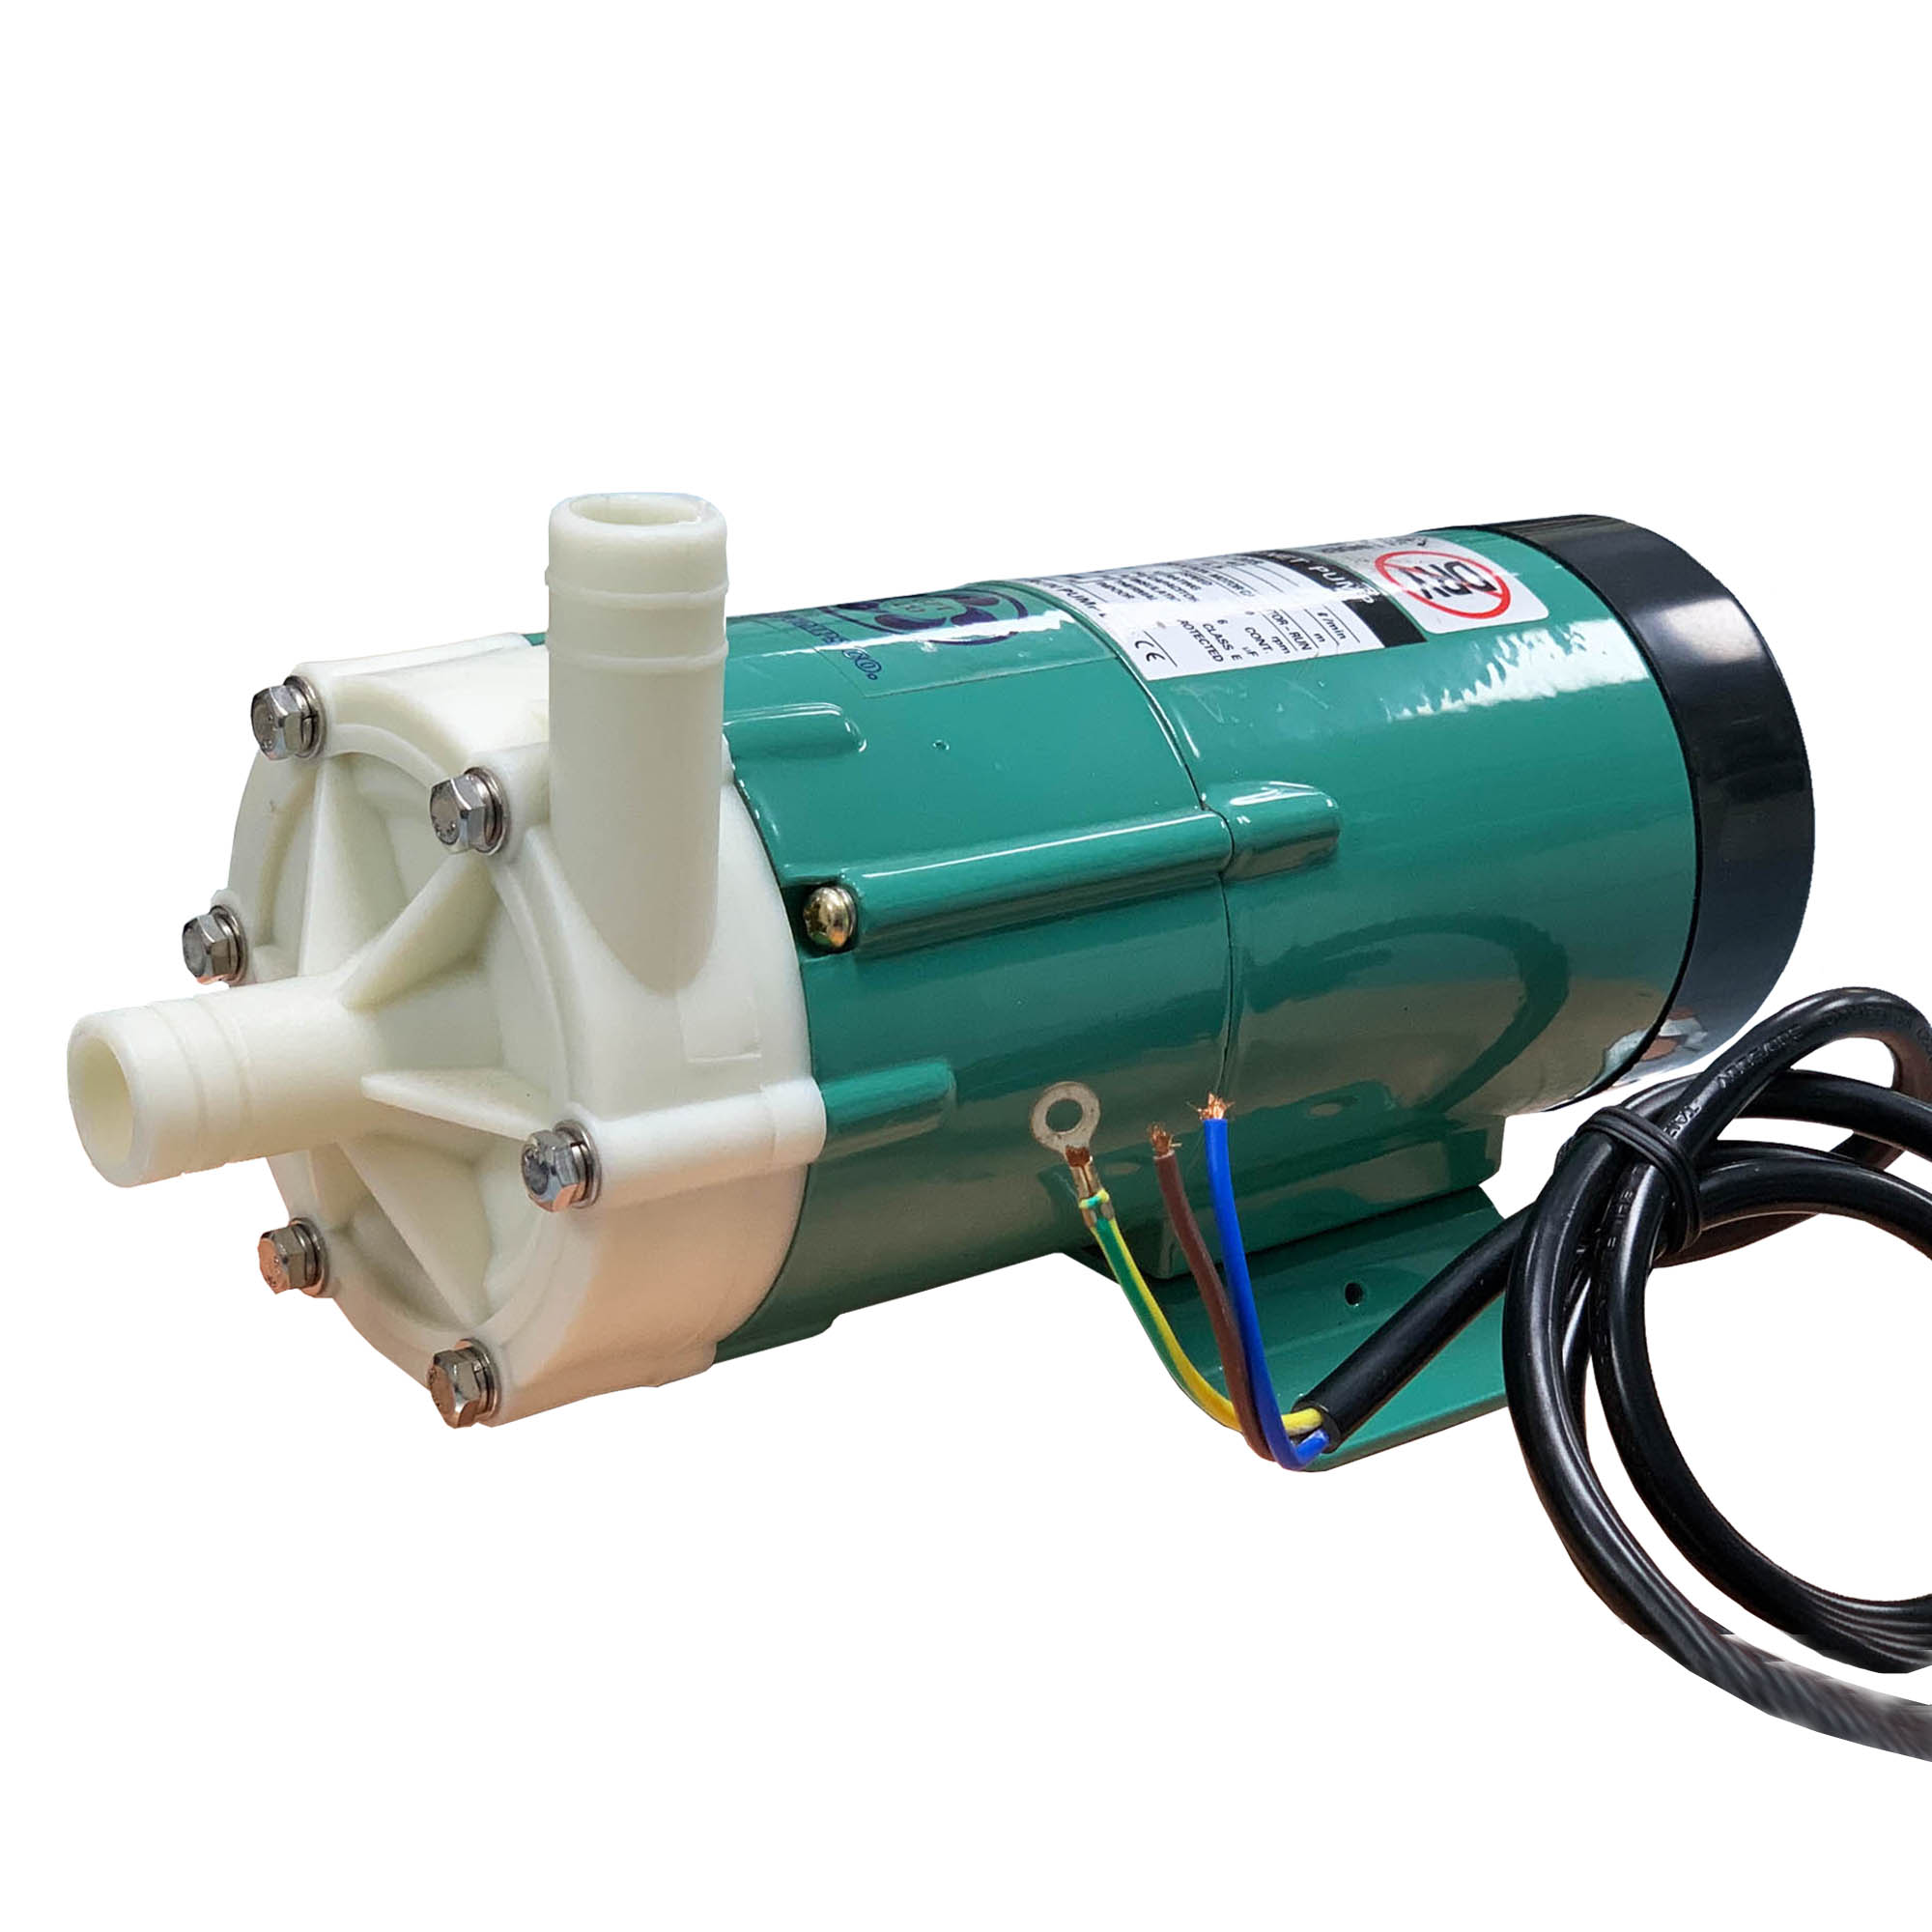 MD-30R Industrial Grade Magnetic Drive Circulation Water Pump 